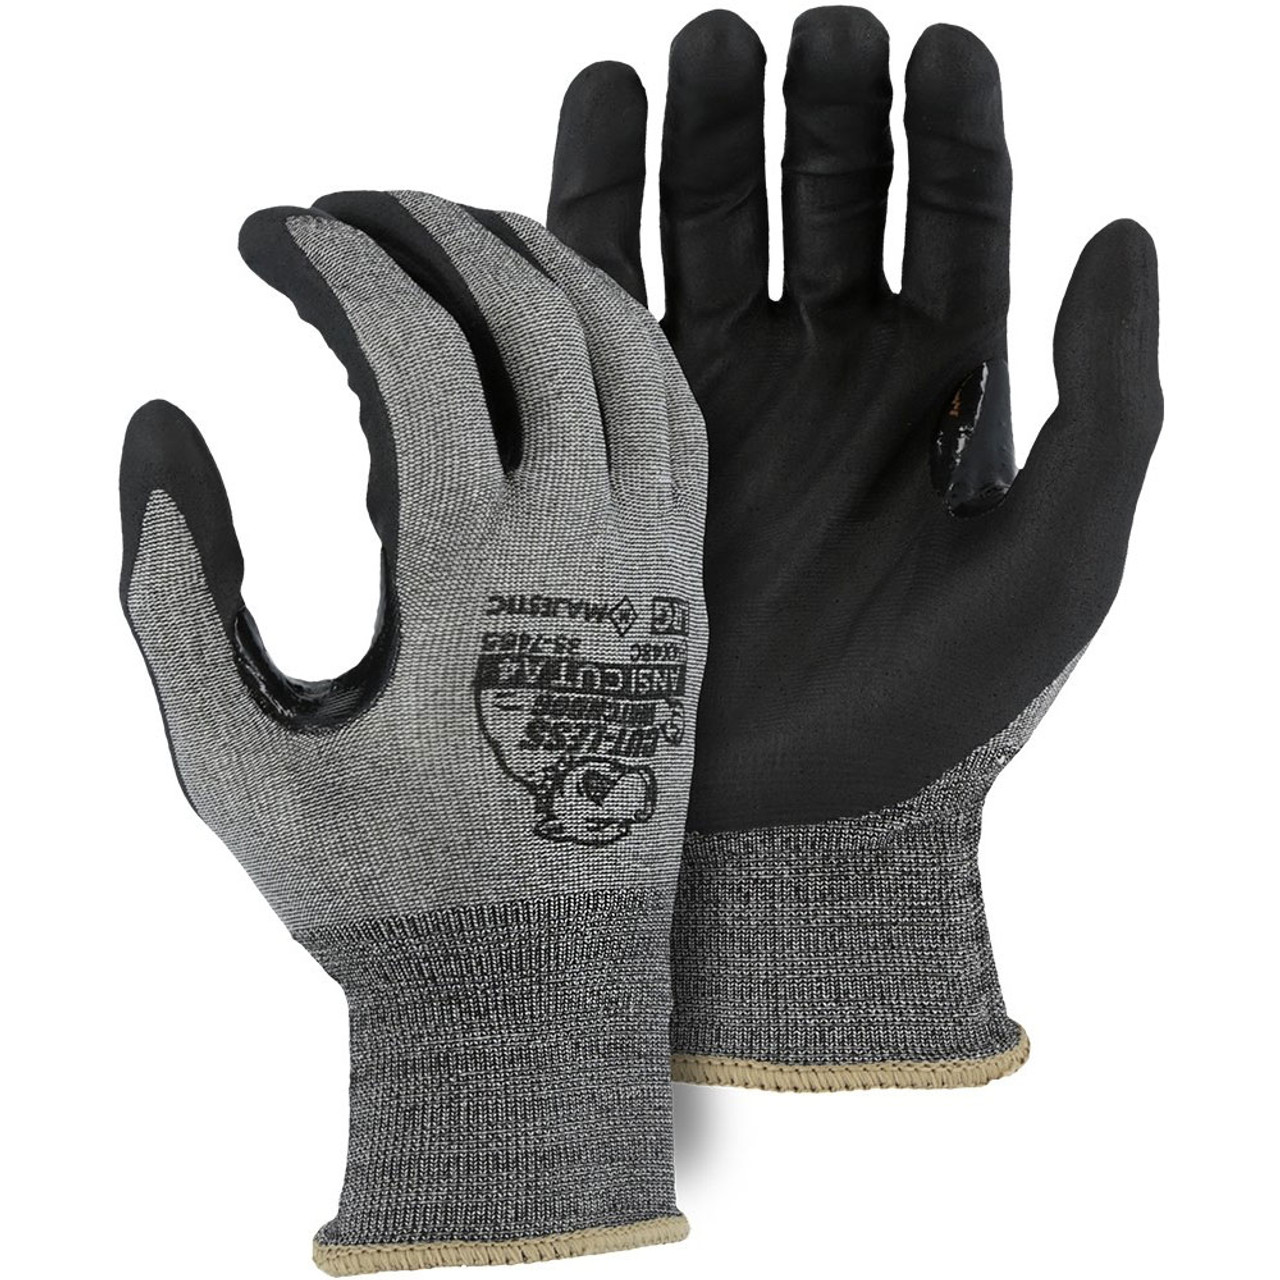 Majestic A4 Cut Level Watchdog Gloves with Foam Nitrile Palm Coating  35-7465 - Box of 12 Pair